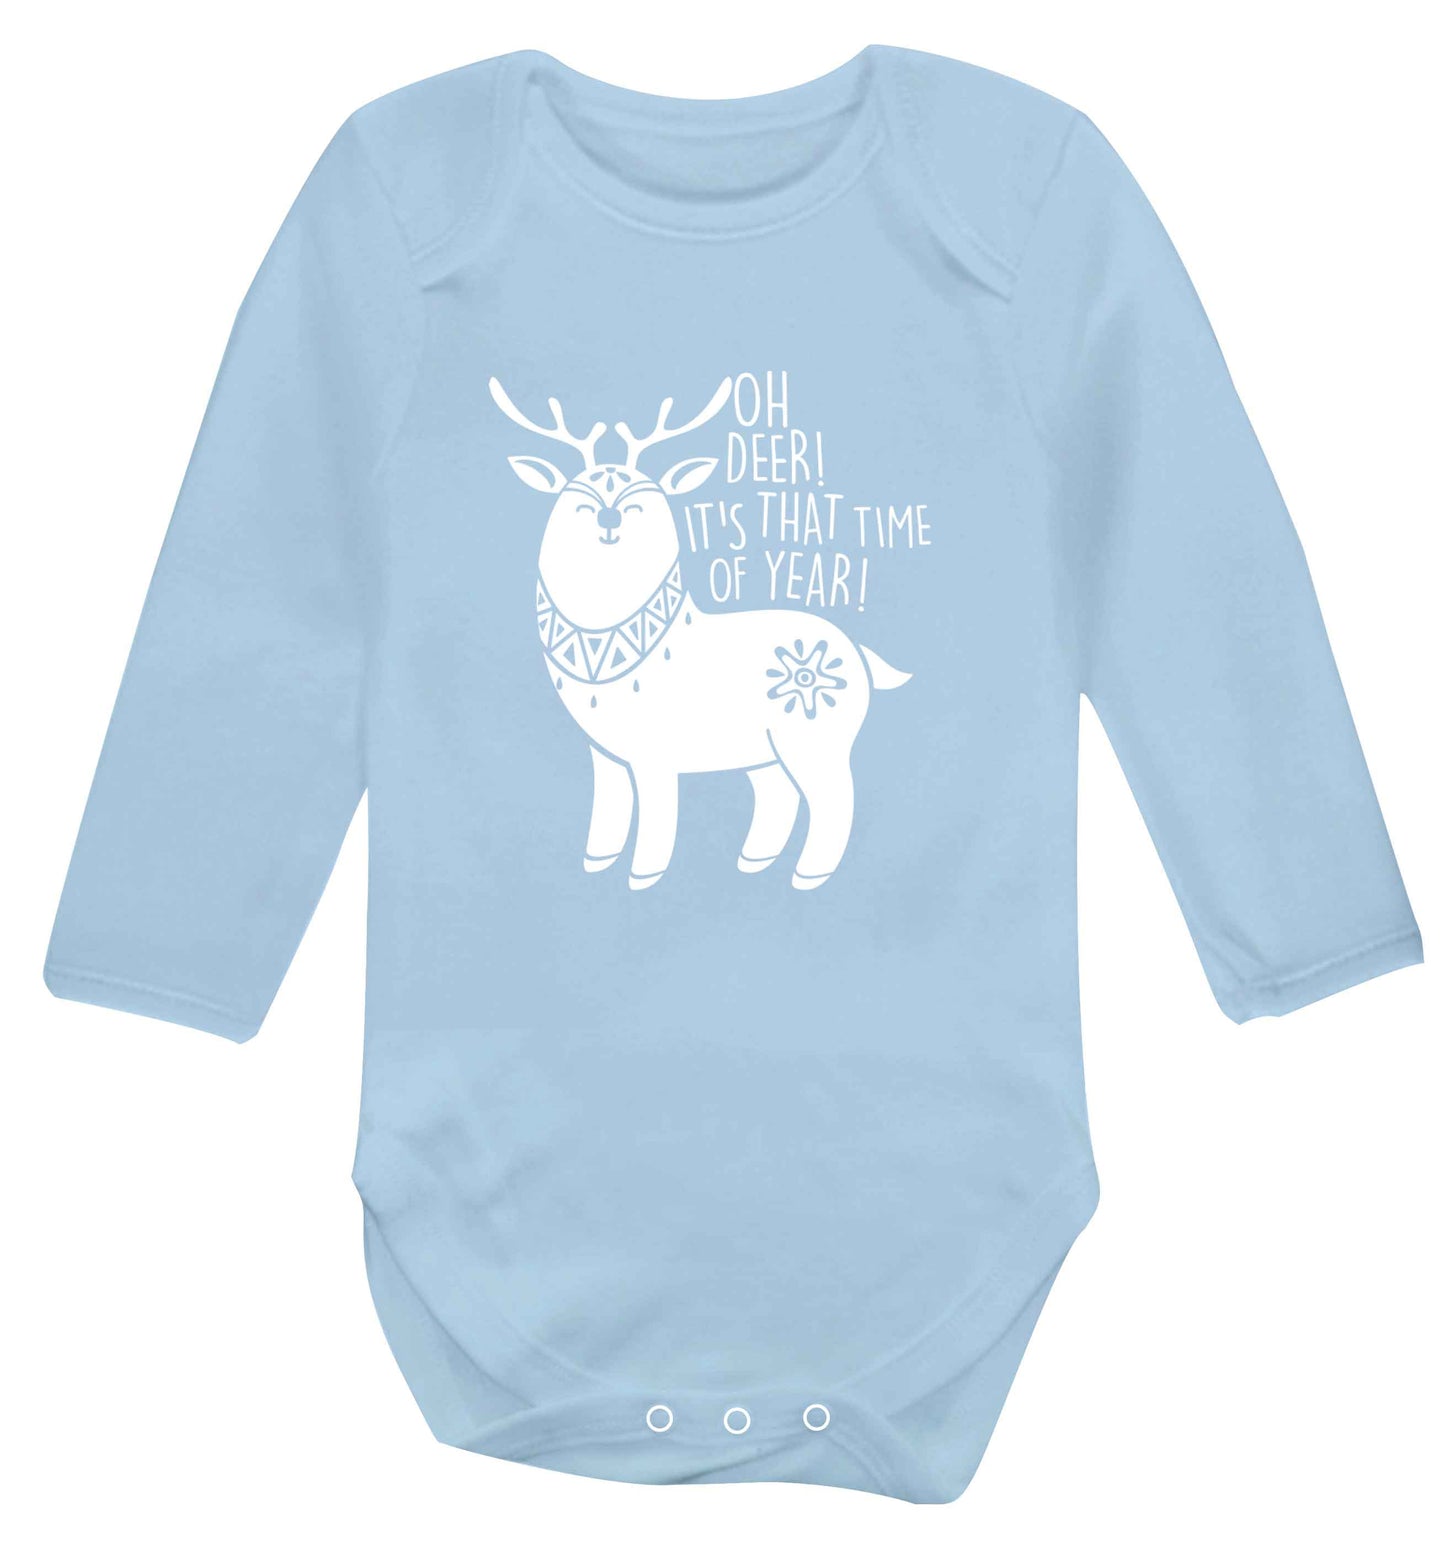 Oh dear it's that time of year Baby Vest long sleeved pale blue 6-12 months